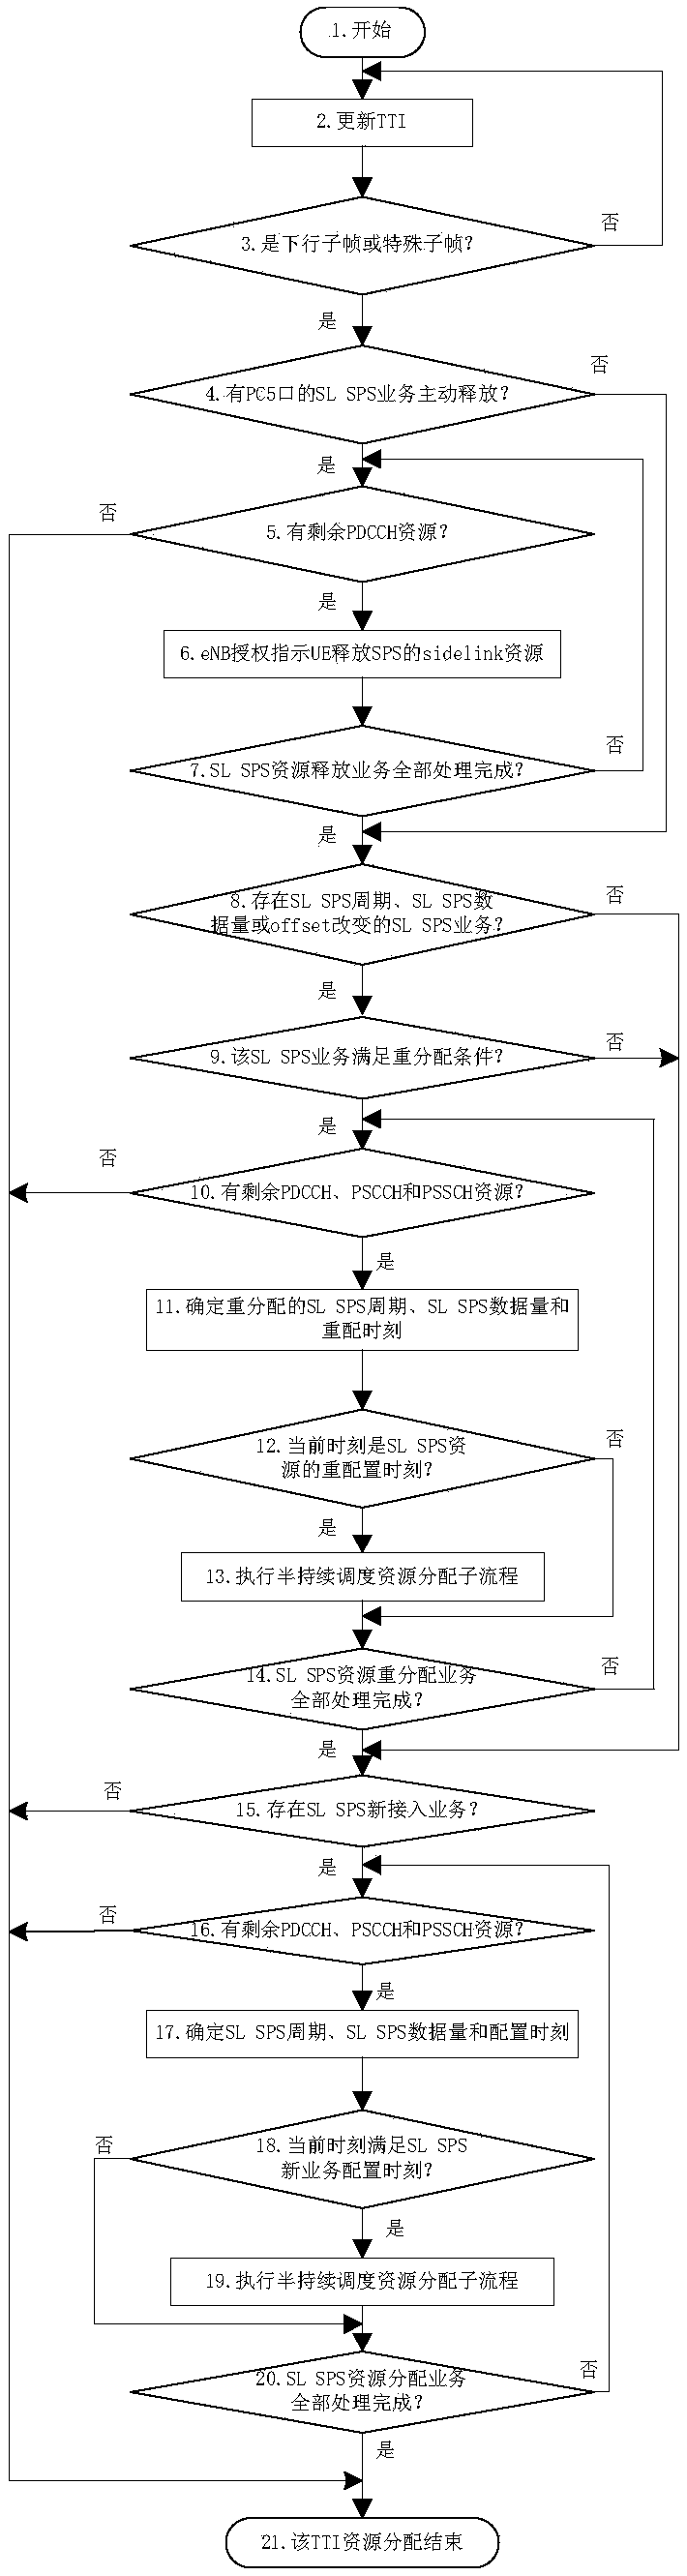 A semi-persistent scheduling resource allocation method and a base station